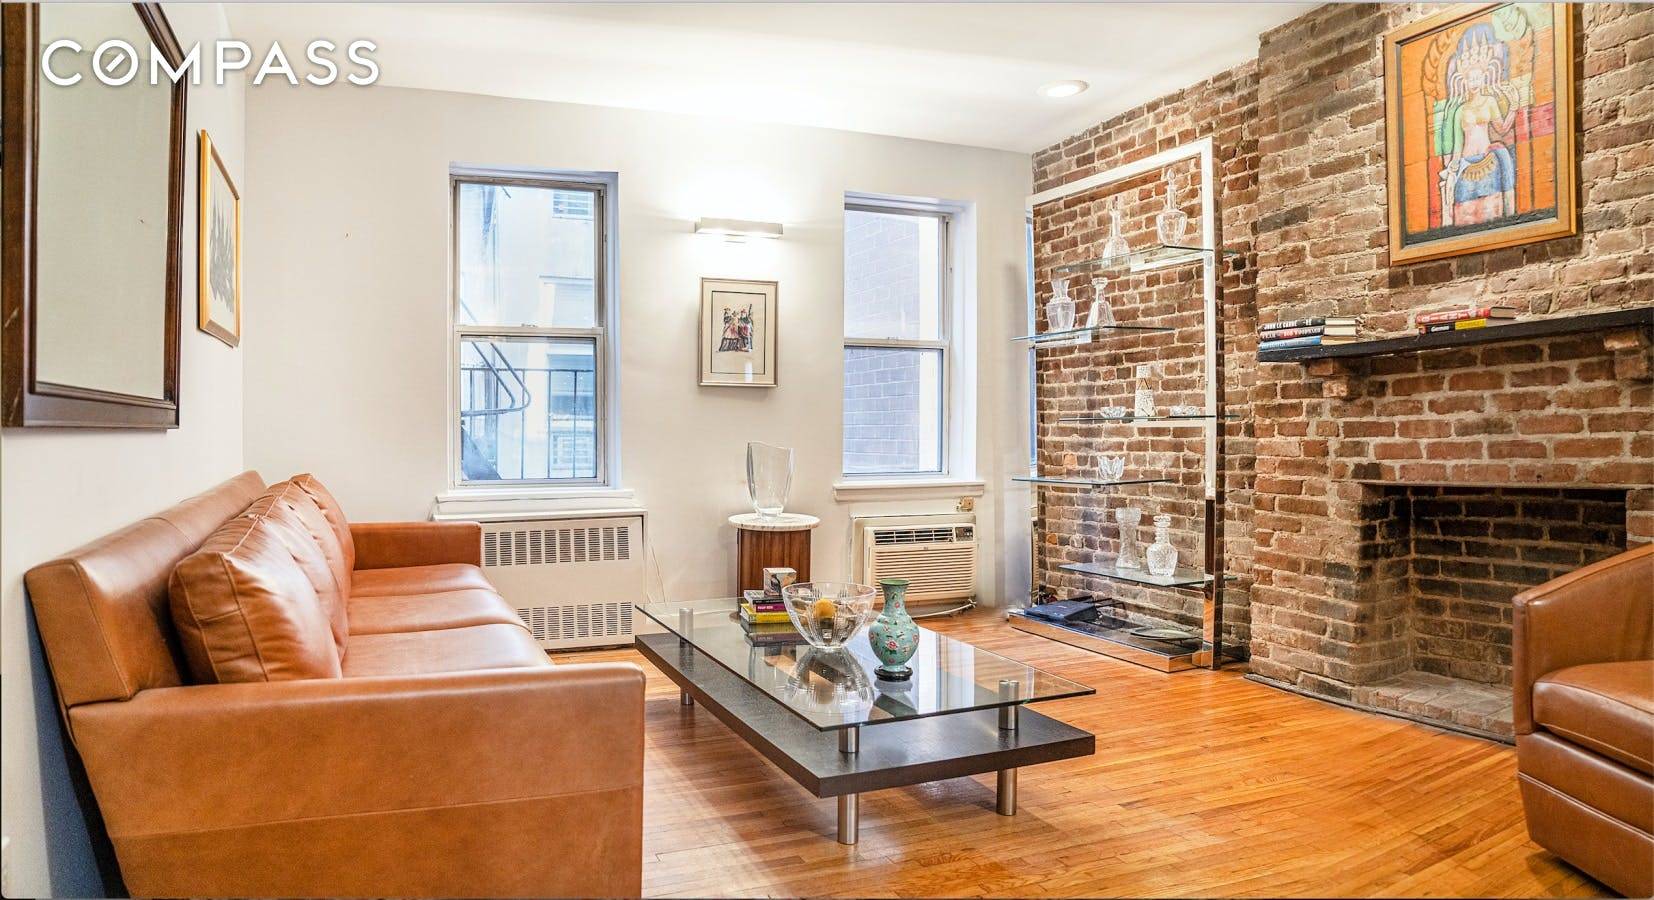 Charming Gramercy apartment with exposed brick walls.